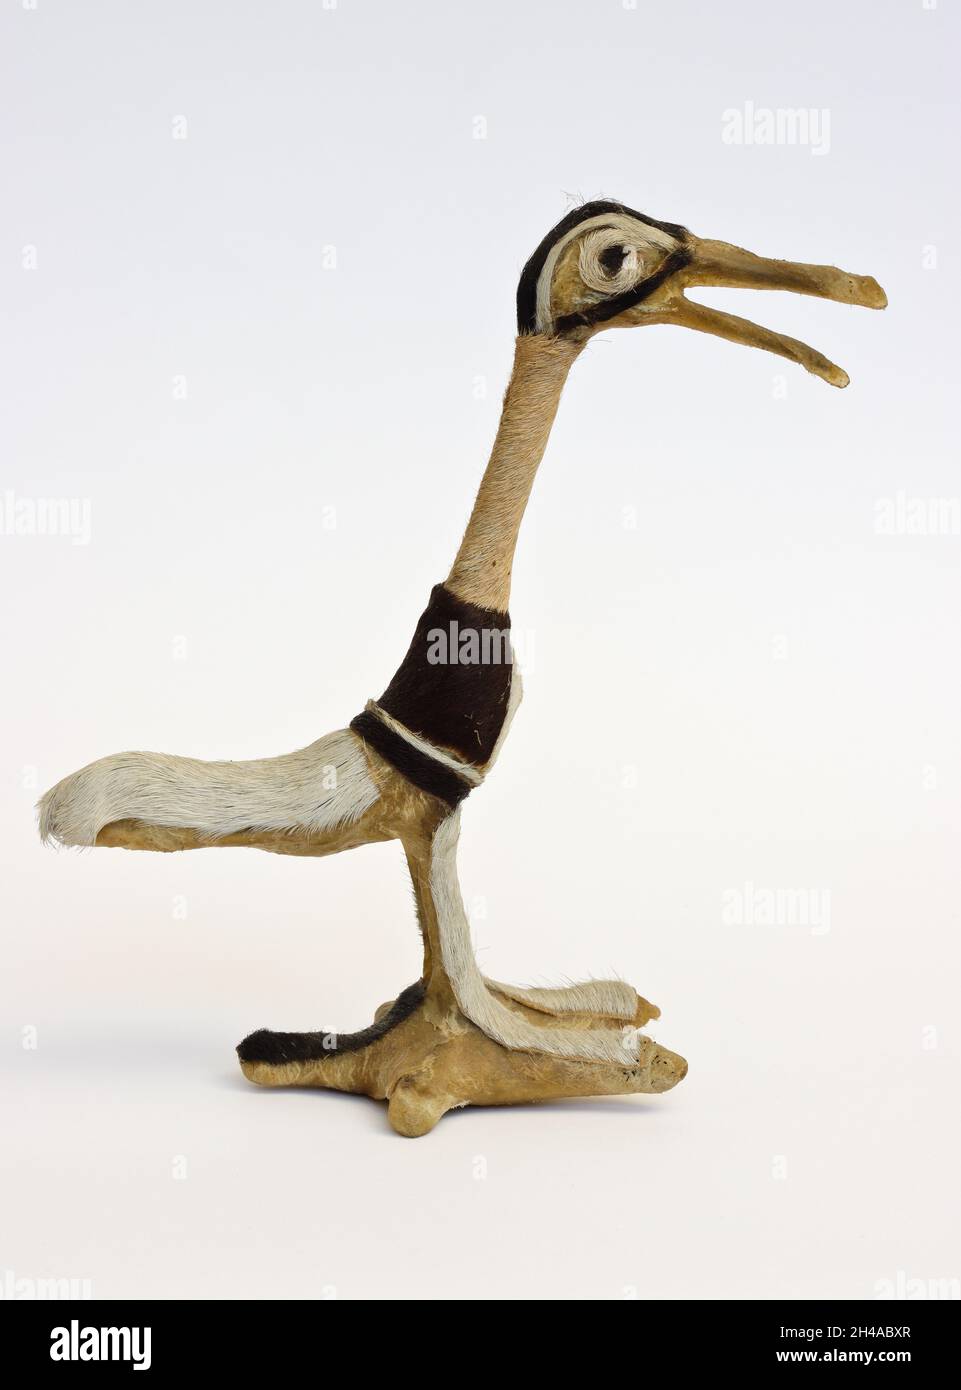 African sculpture of bird from tendon and leather Stock Photo